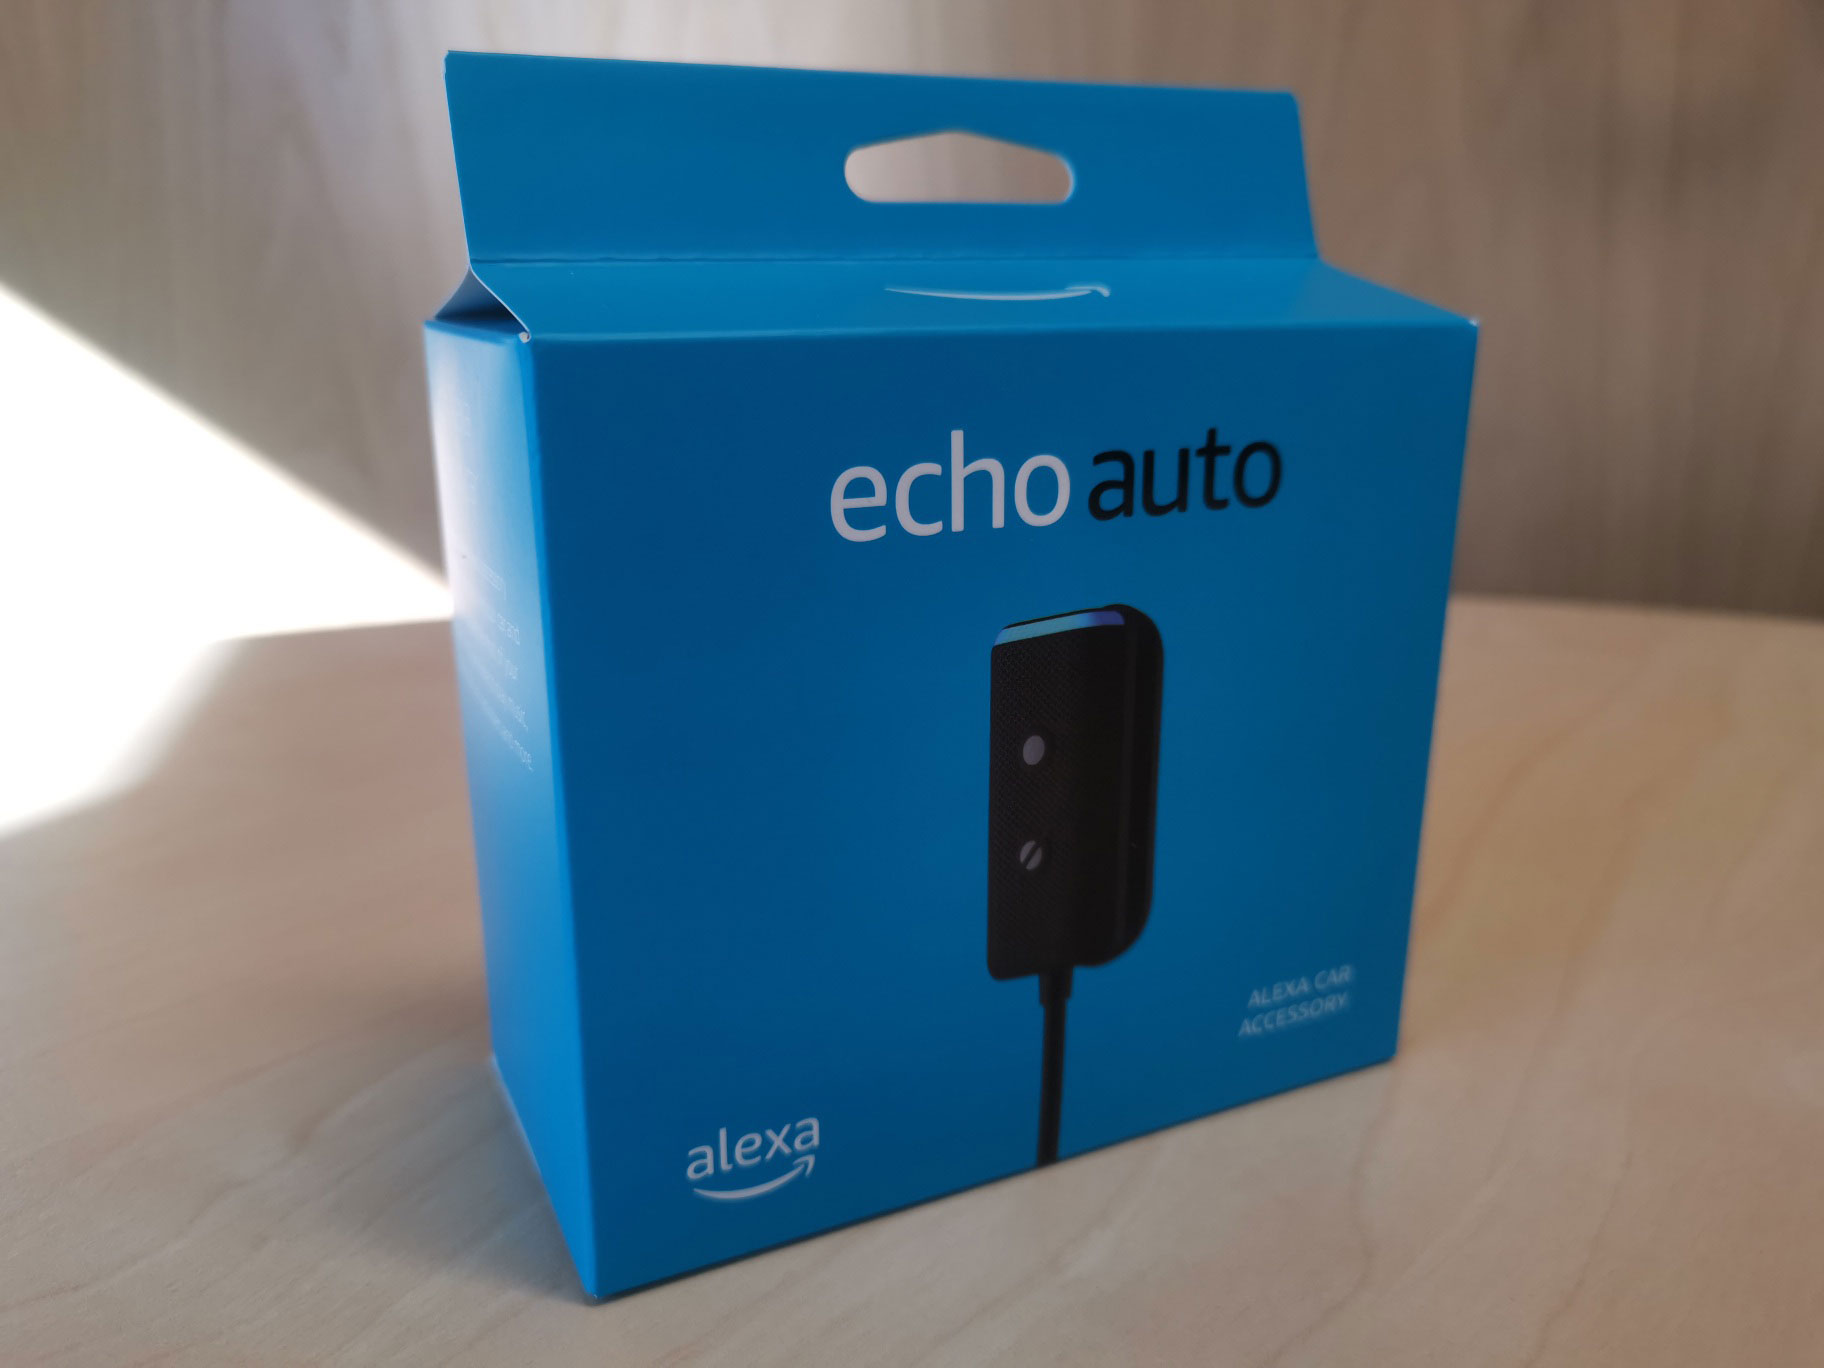 Echo Auto 2nd Gen - Review - Should You Buy One? 